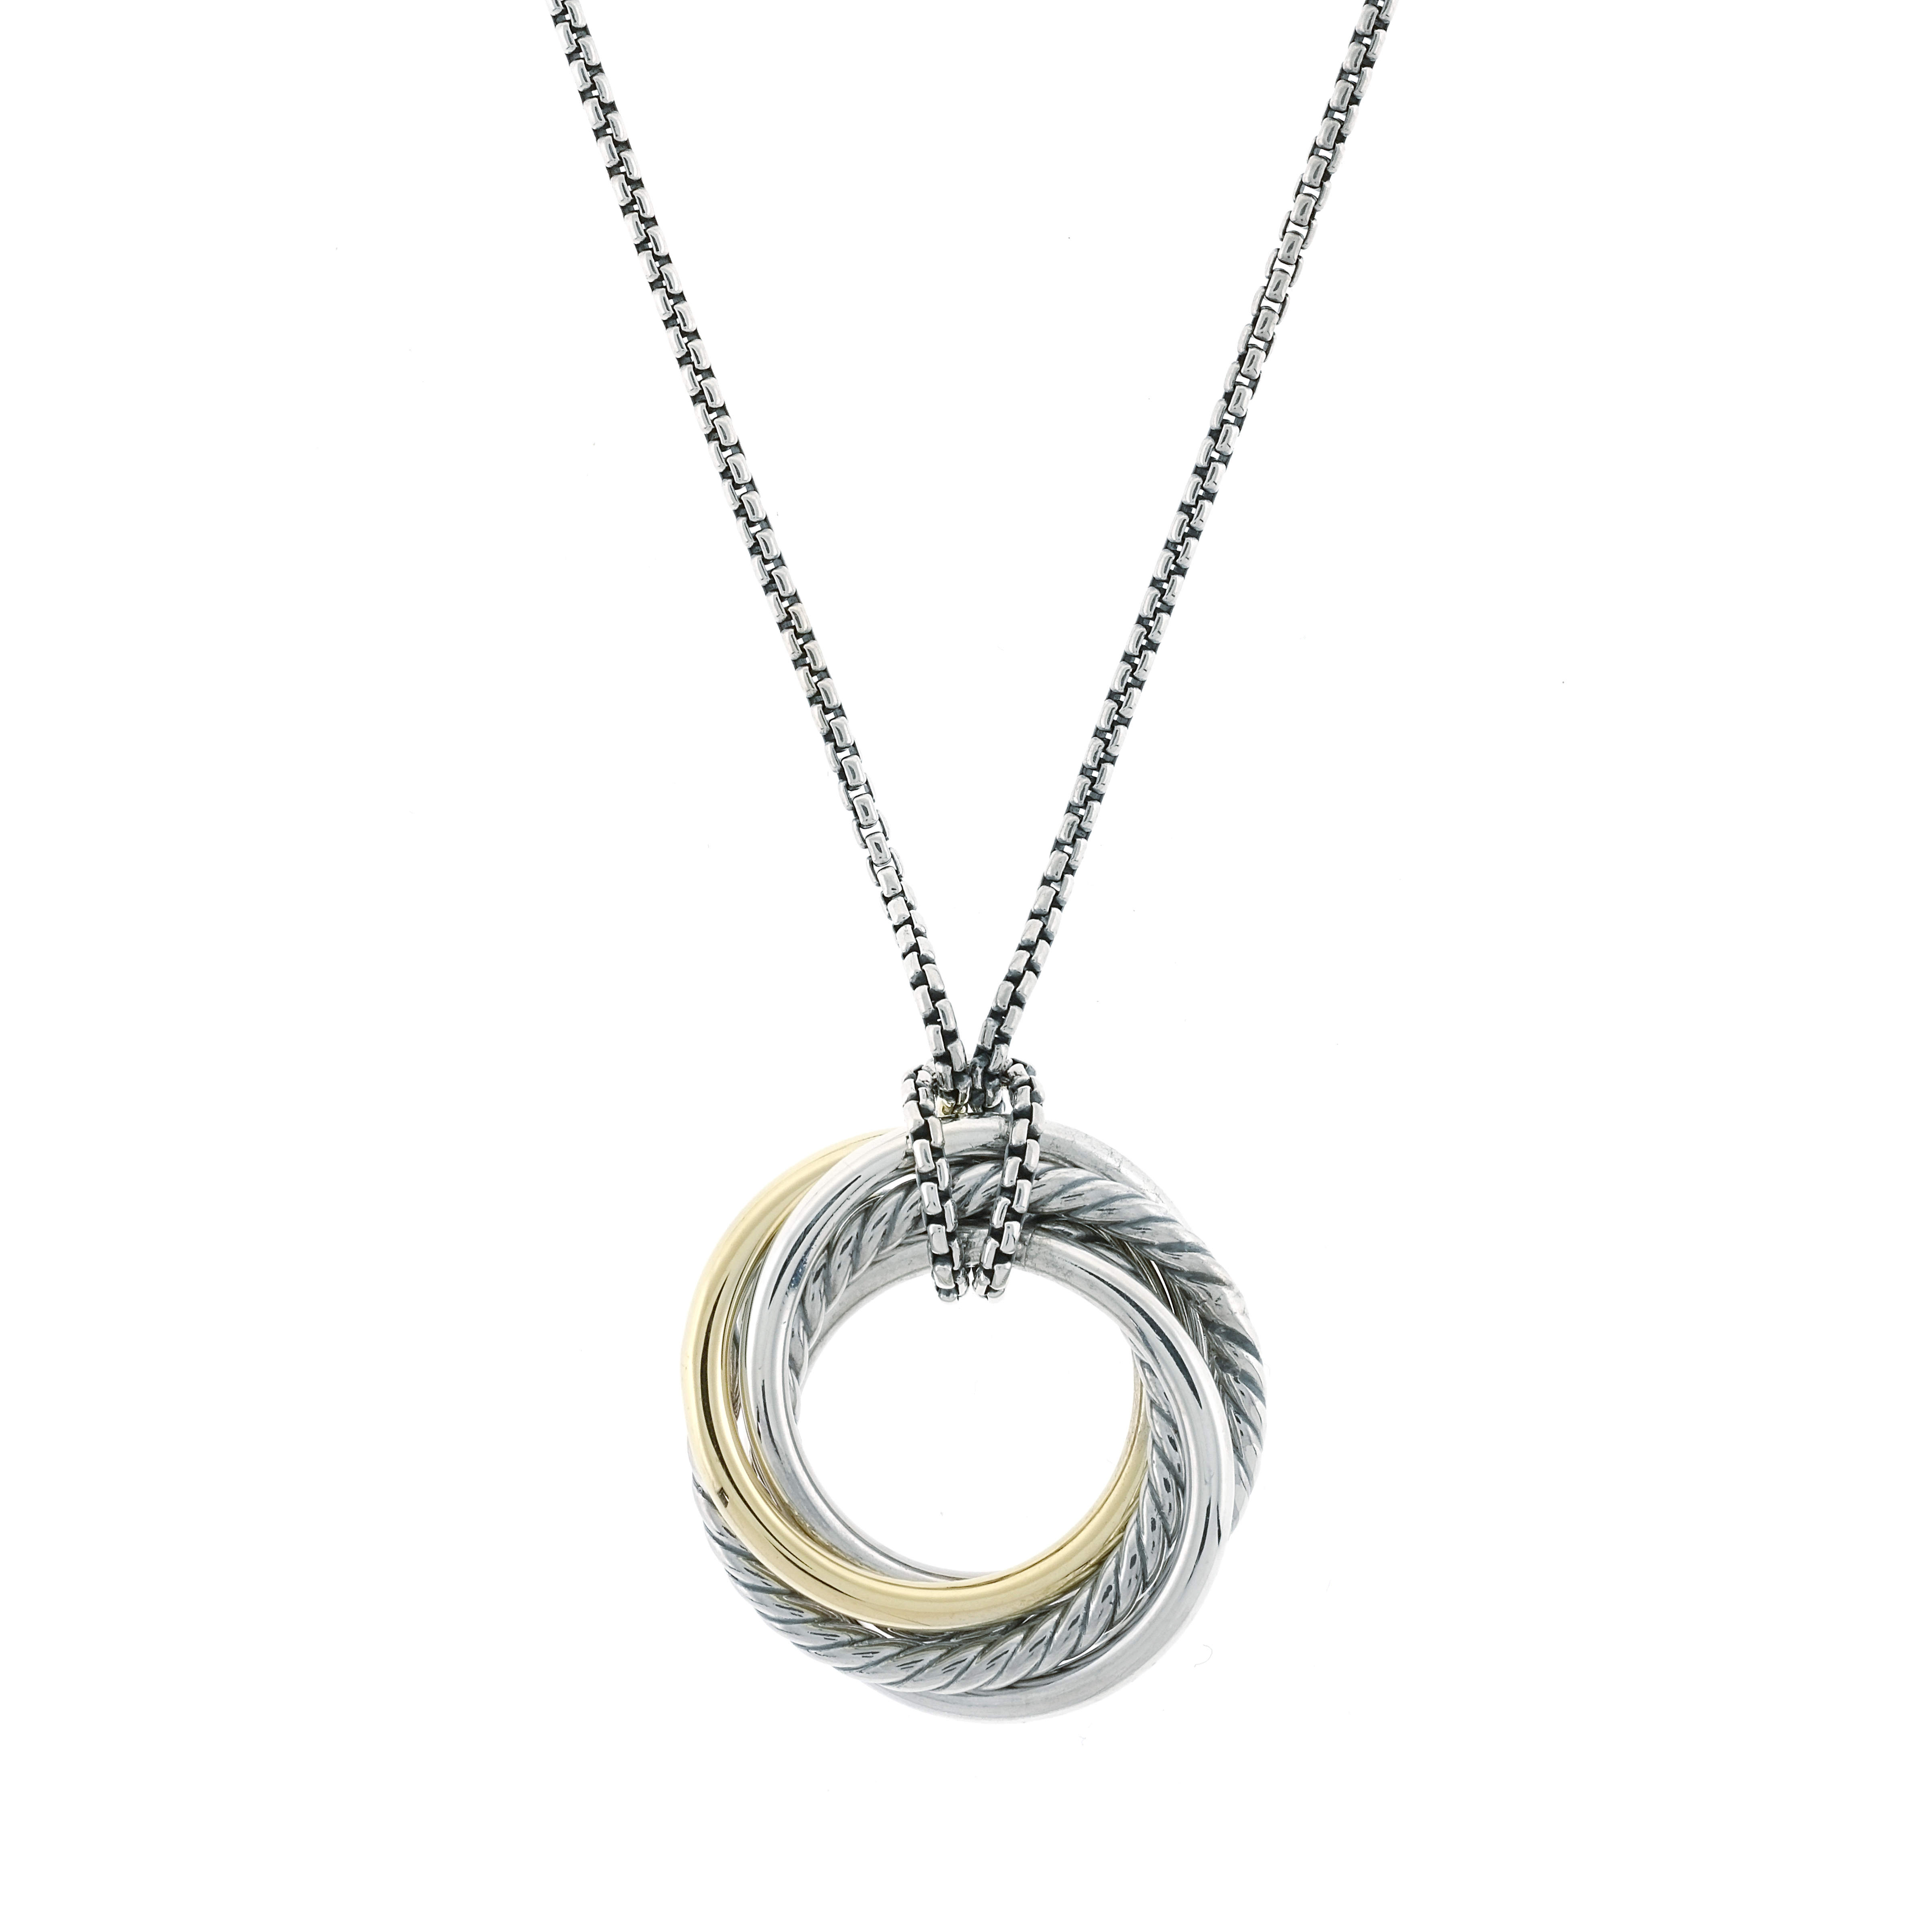 David Yurman Crossover Convertible Statement Necklace with Diamonds |  Bloomingdale's